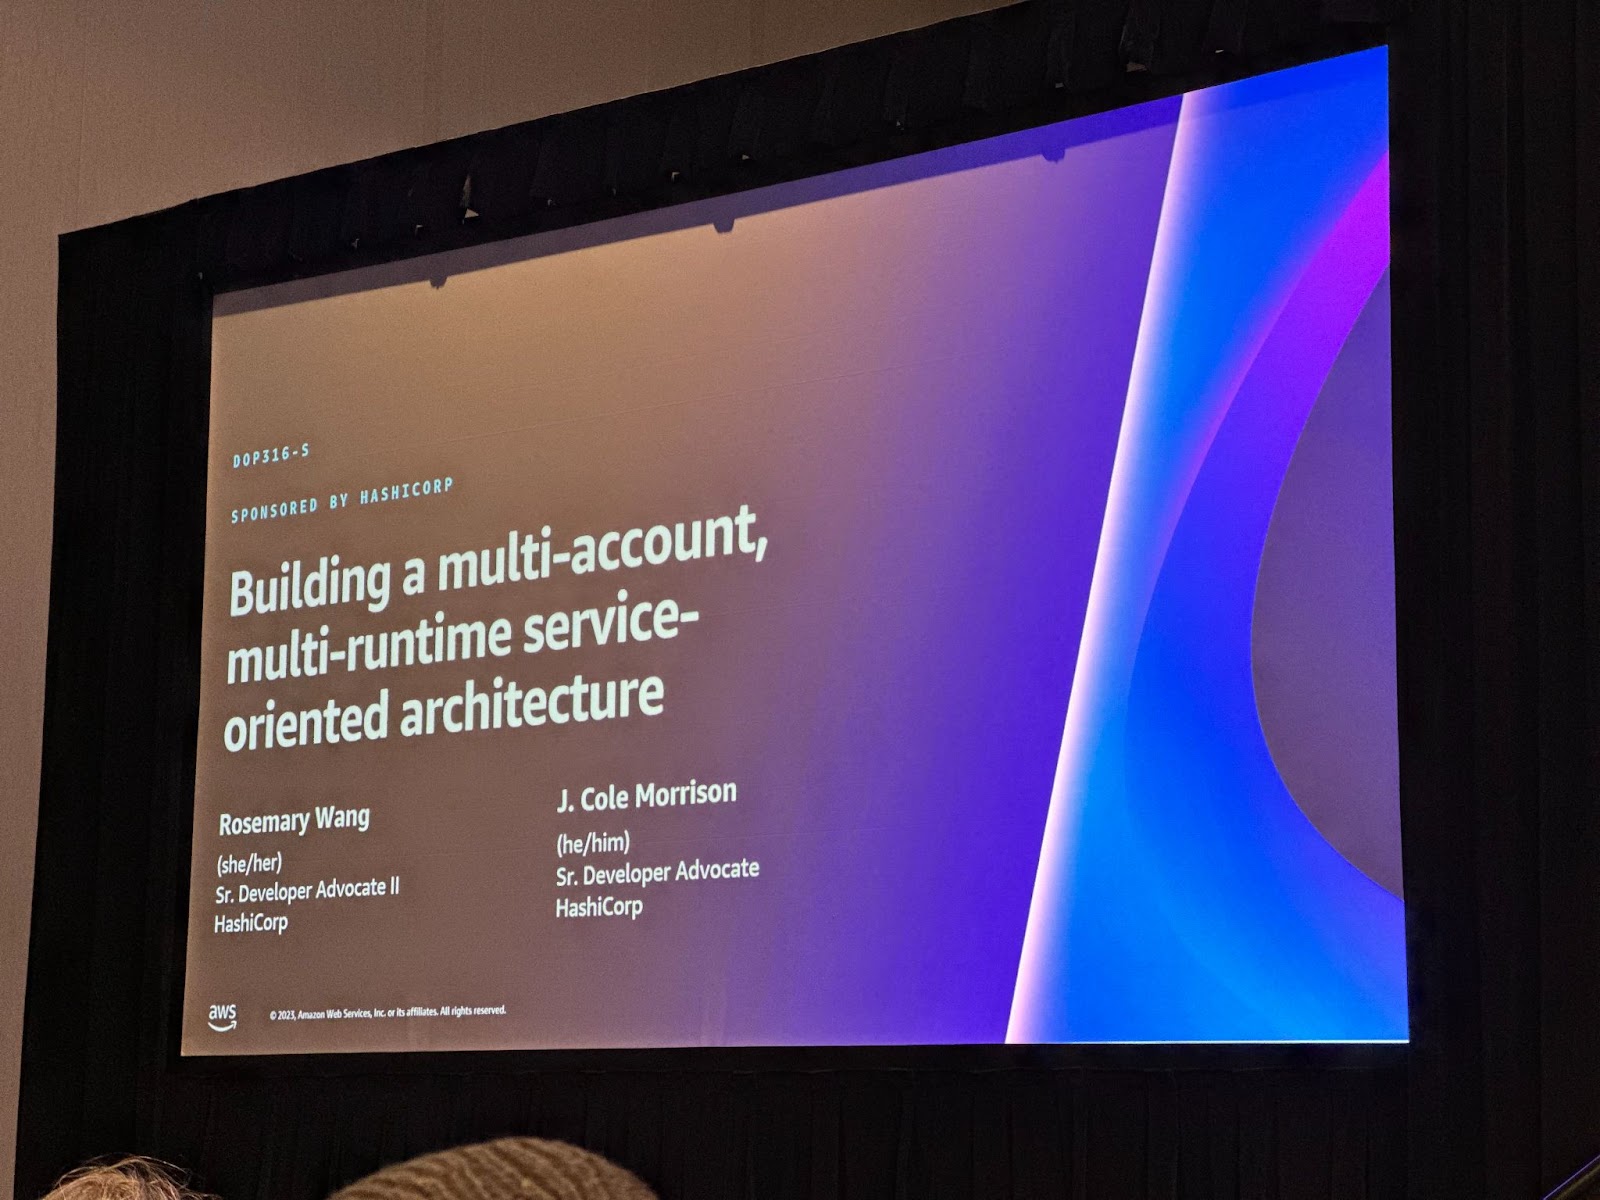 Building a multi-account, multi-runtime service-oriented architecture (sponsored by HashiCorp)